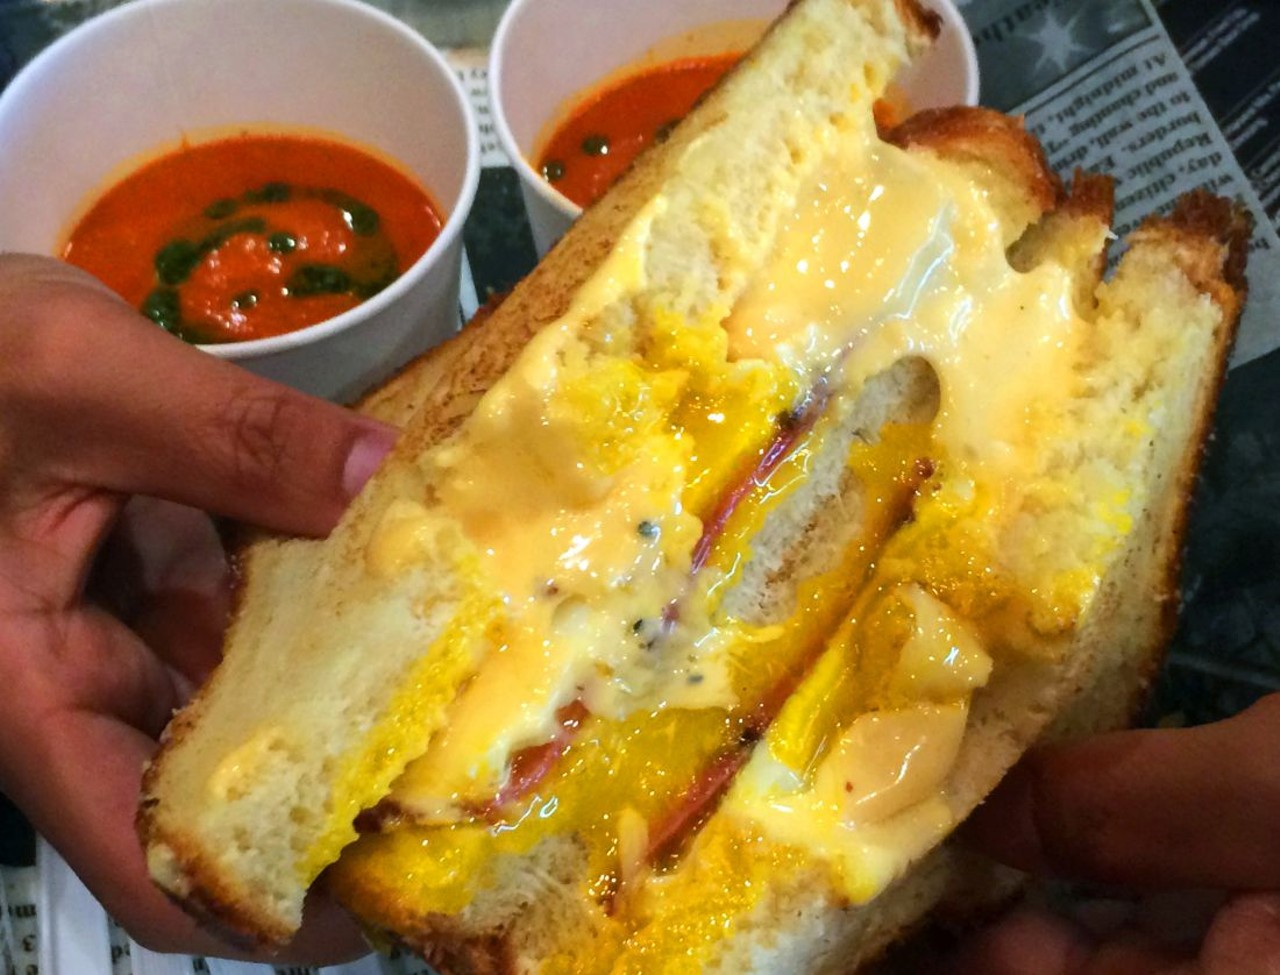 "All Up In Your Grill&#148; Cheese Sandwich with a fried egg, turkey bacon, cheese fondue, smoked gouda fondue, and parmesan next to a roasted tomato basil soup